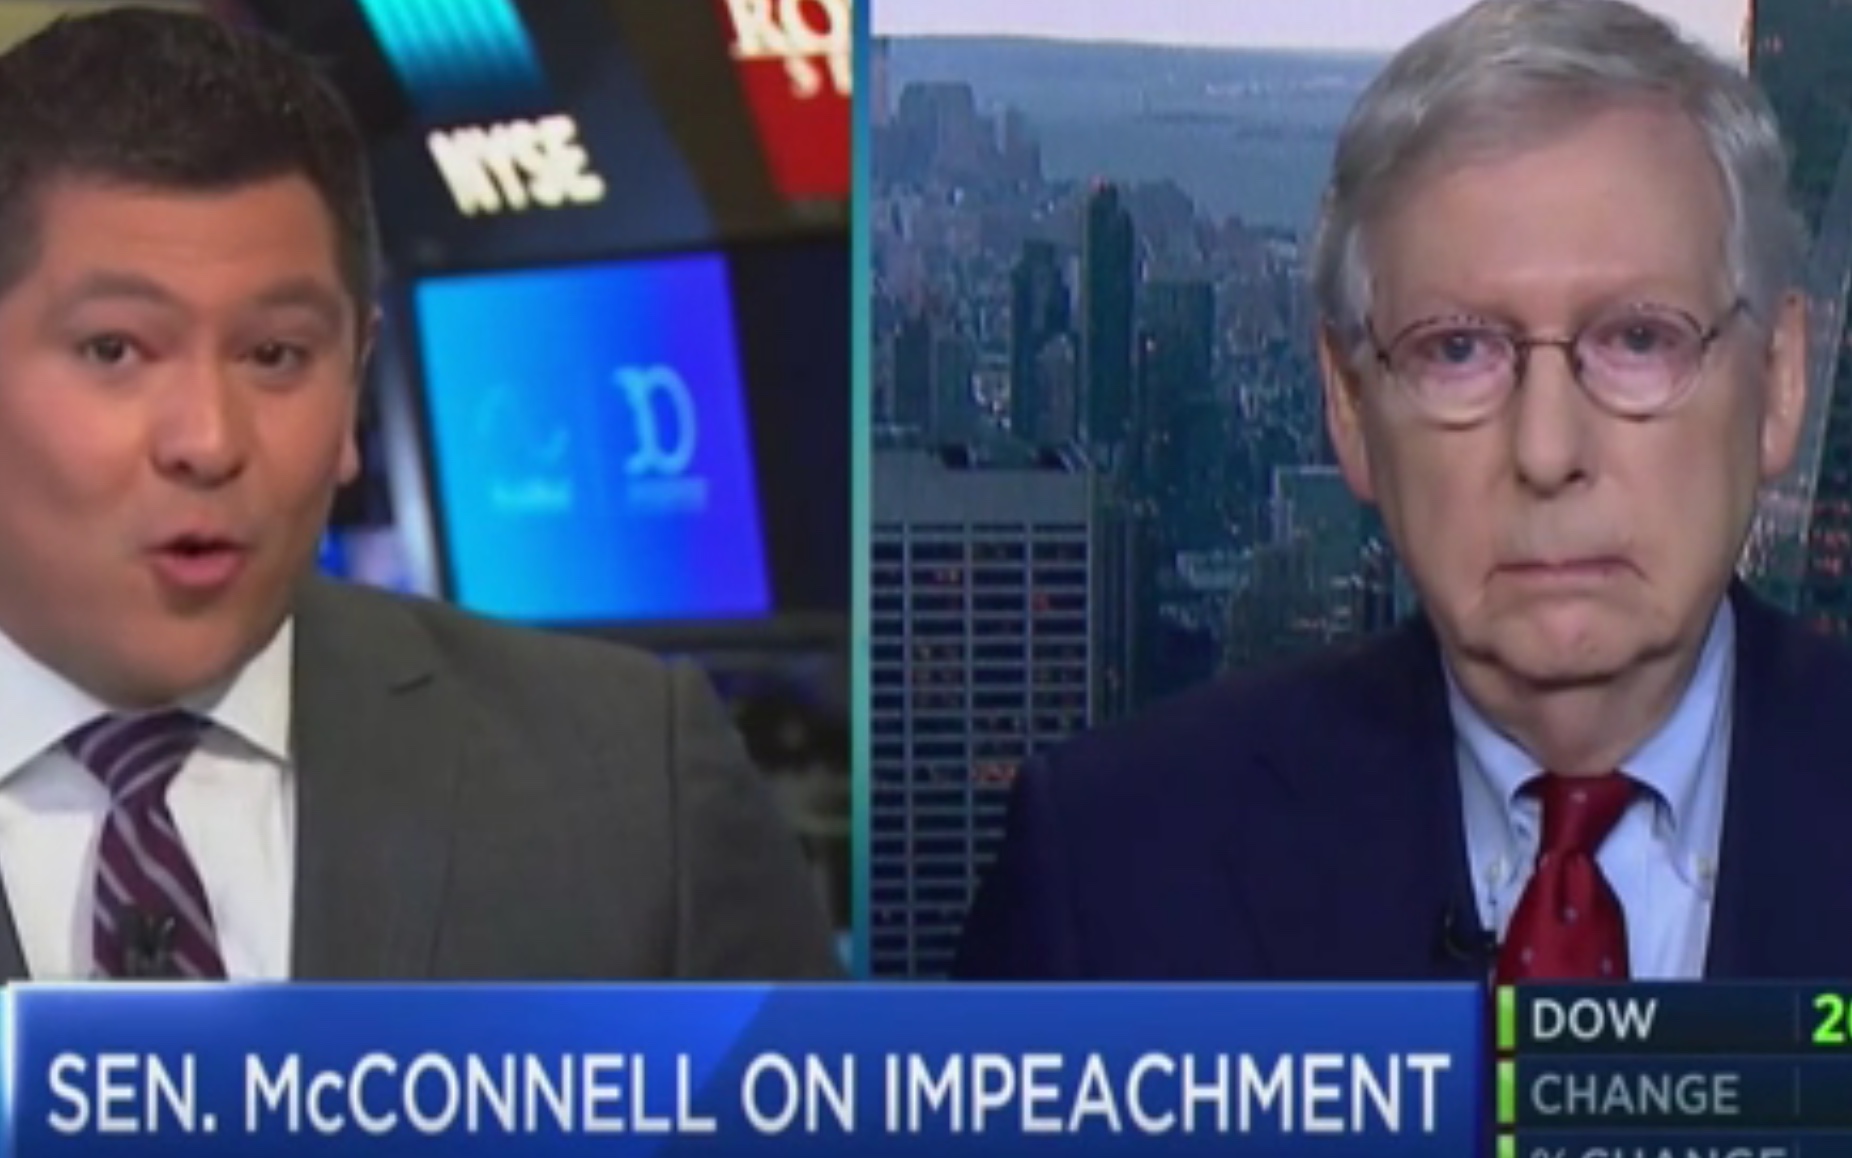 Senate Majority Leader Mitch McConnell talks to CNBC about what happens in the Senate if President Donald Trump is Impeached by the House, Sept. 30, 2019. CNBC screenshot.